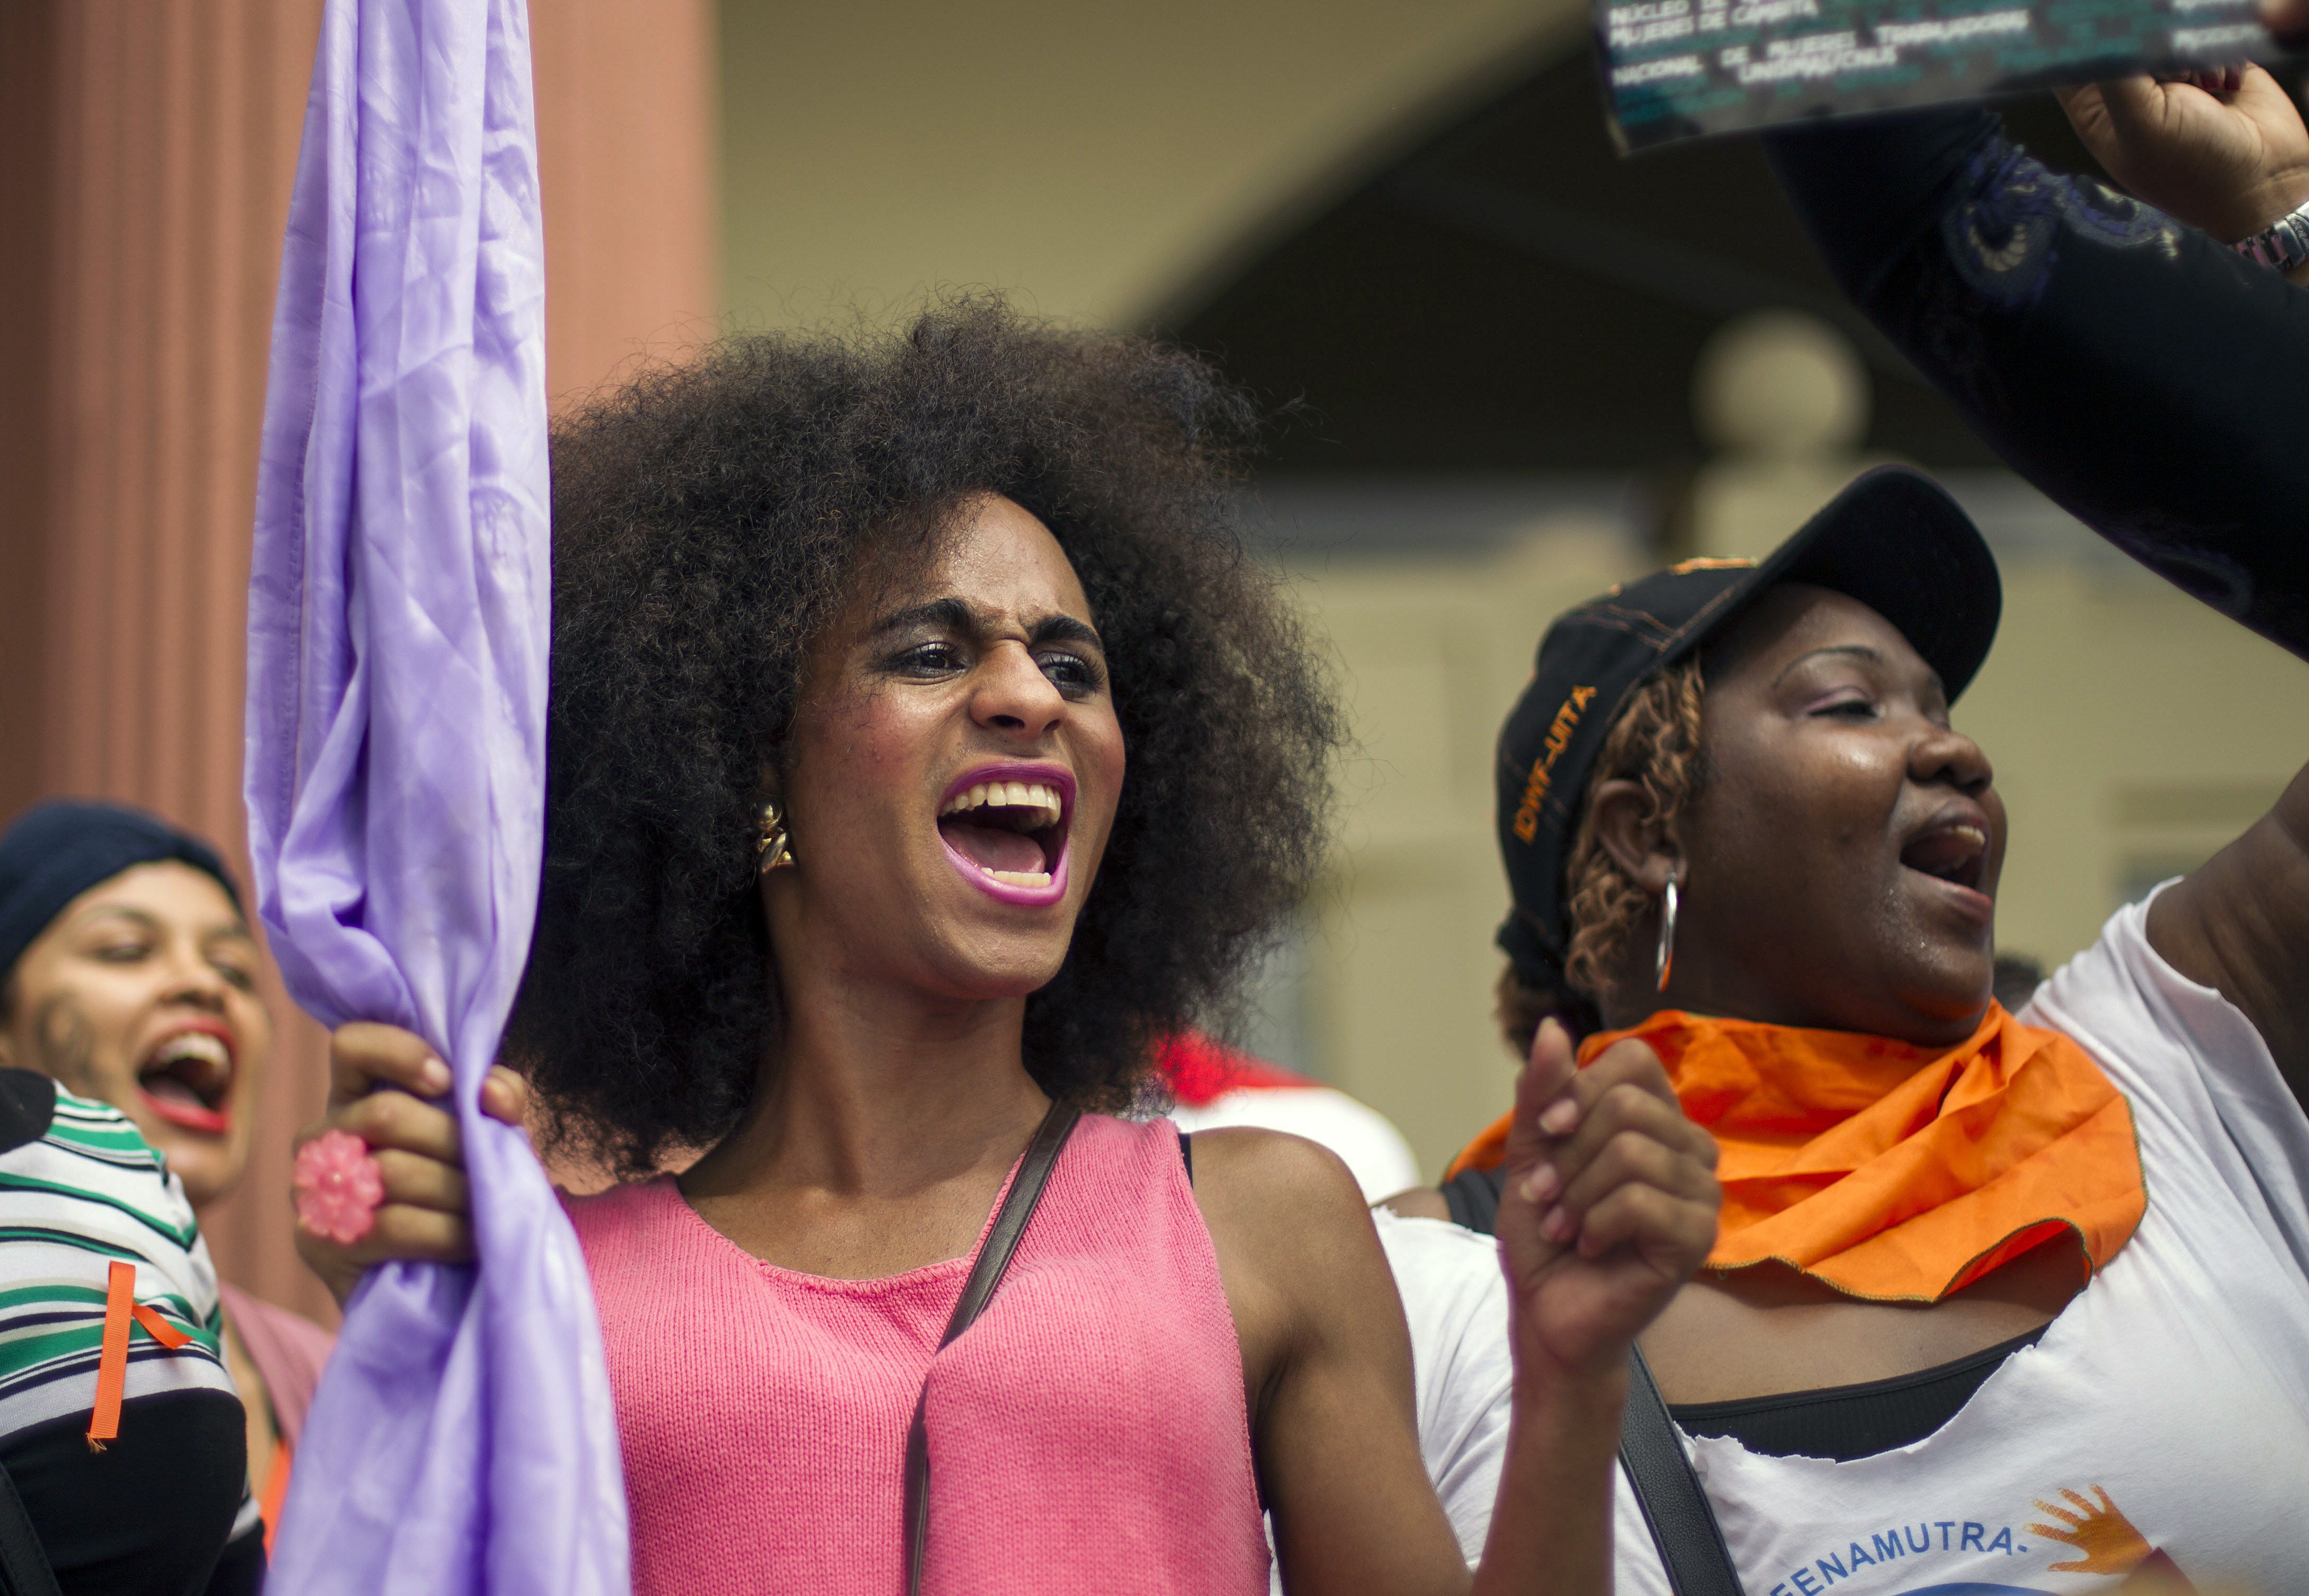 Women shout slogans during a march to commemorate UN's International Day for the Elimination of Violence Against Women, on November 25, 2014 in Santo Domingo, Dominican Republic. (Photo: ERIKA SANTELICES/AFP/Getty Images)